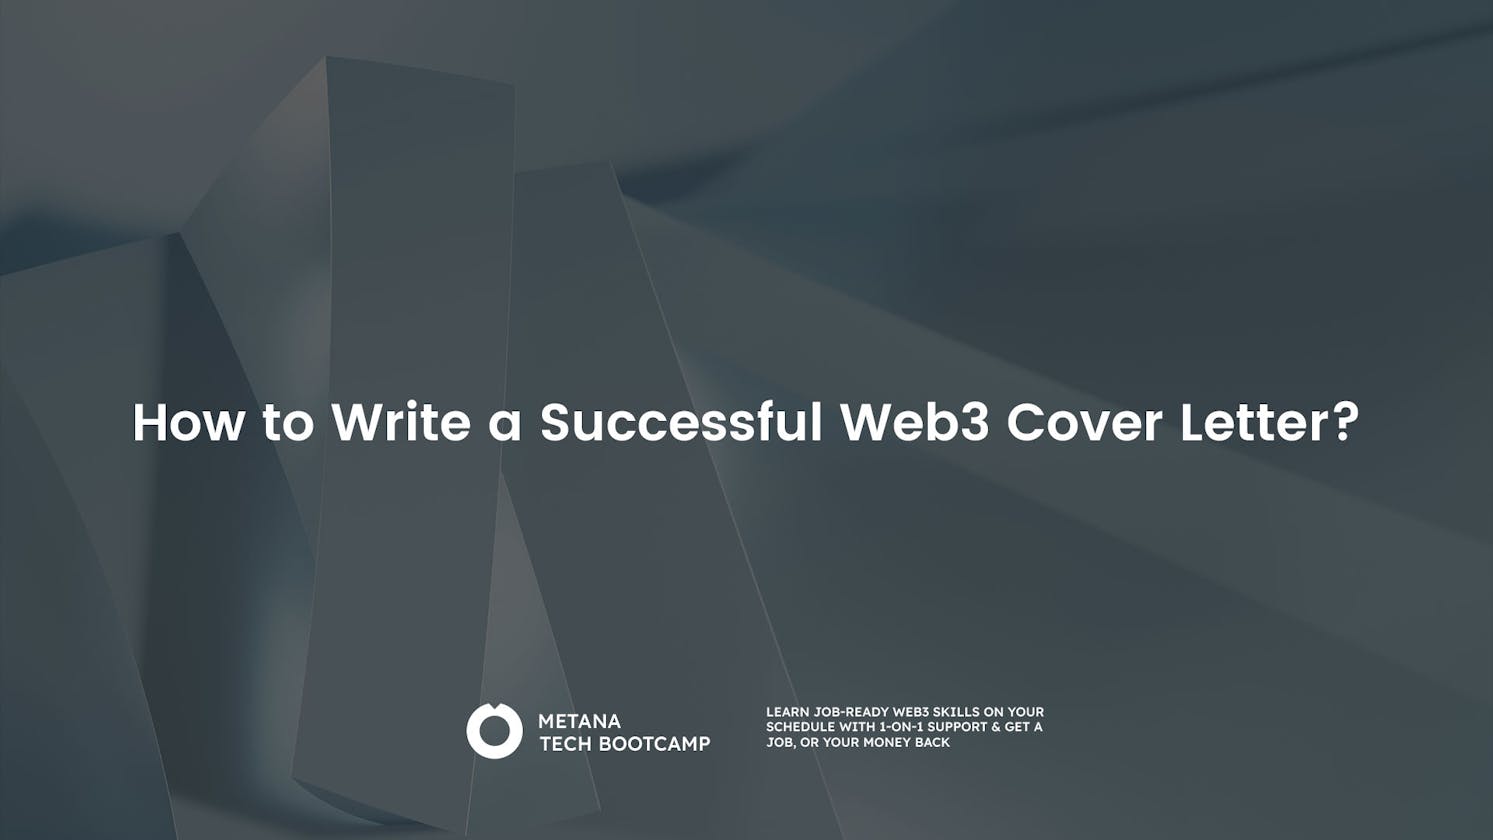 How to Write a Successful Web3 Cover Letter?